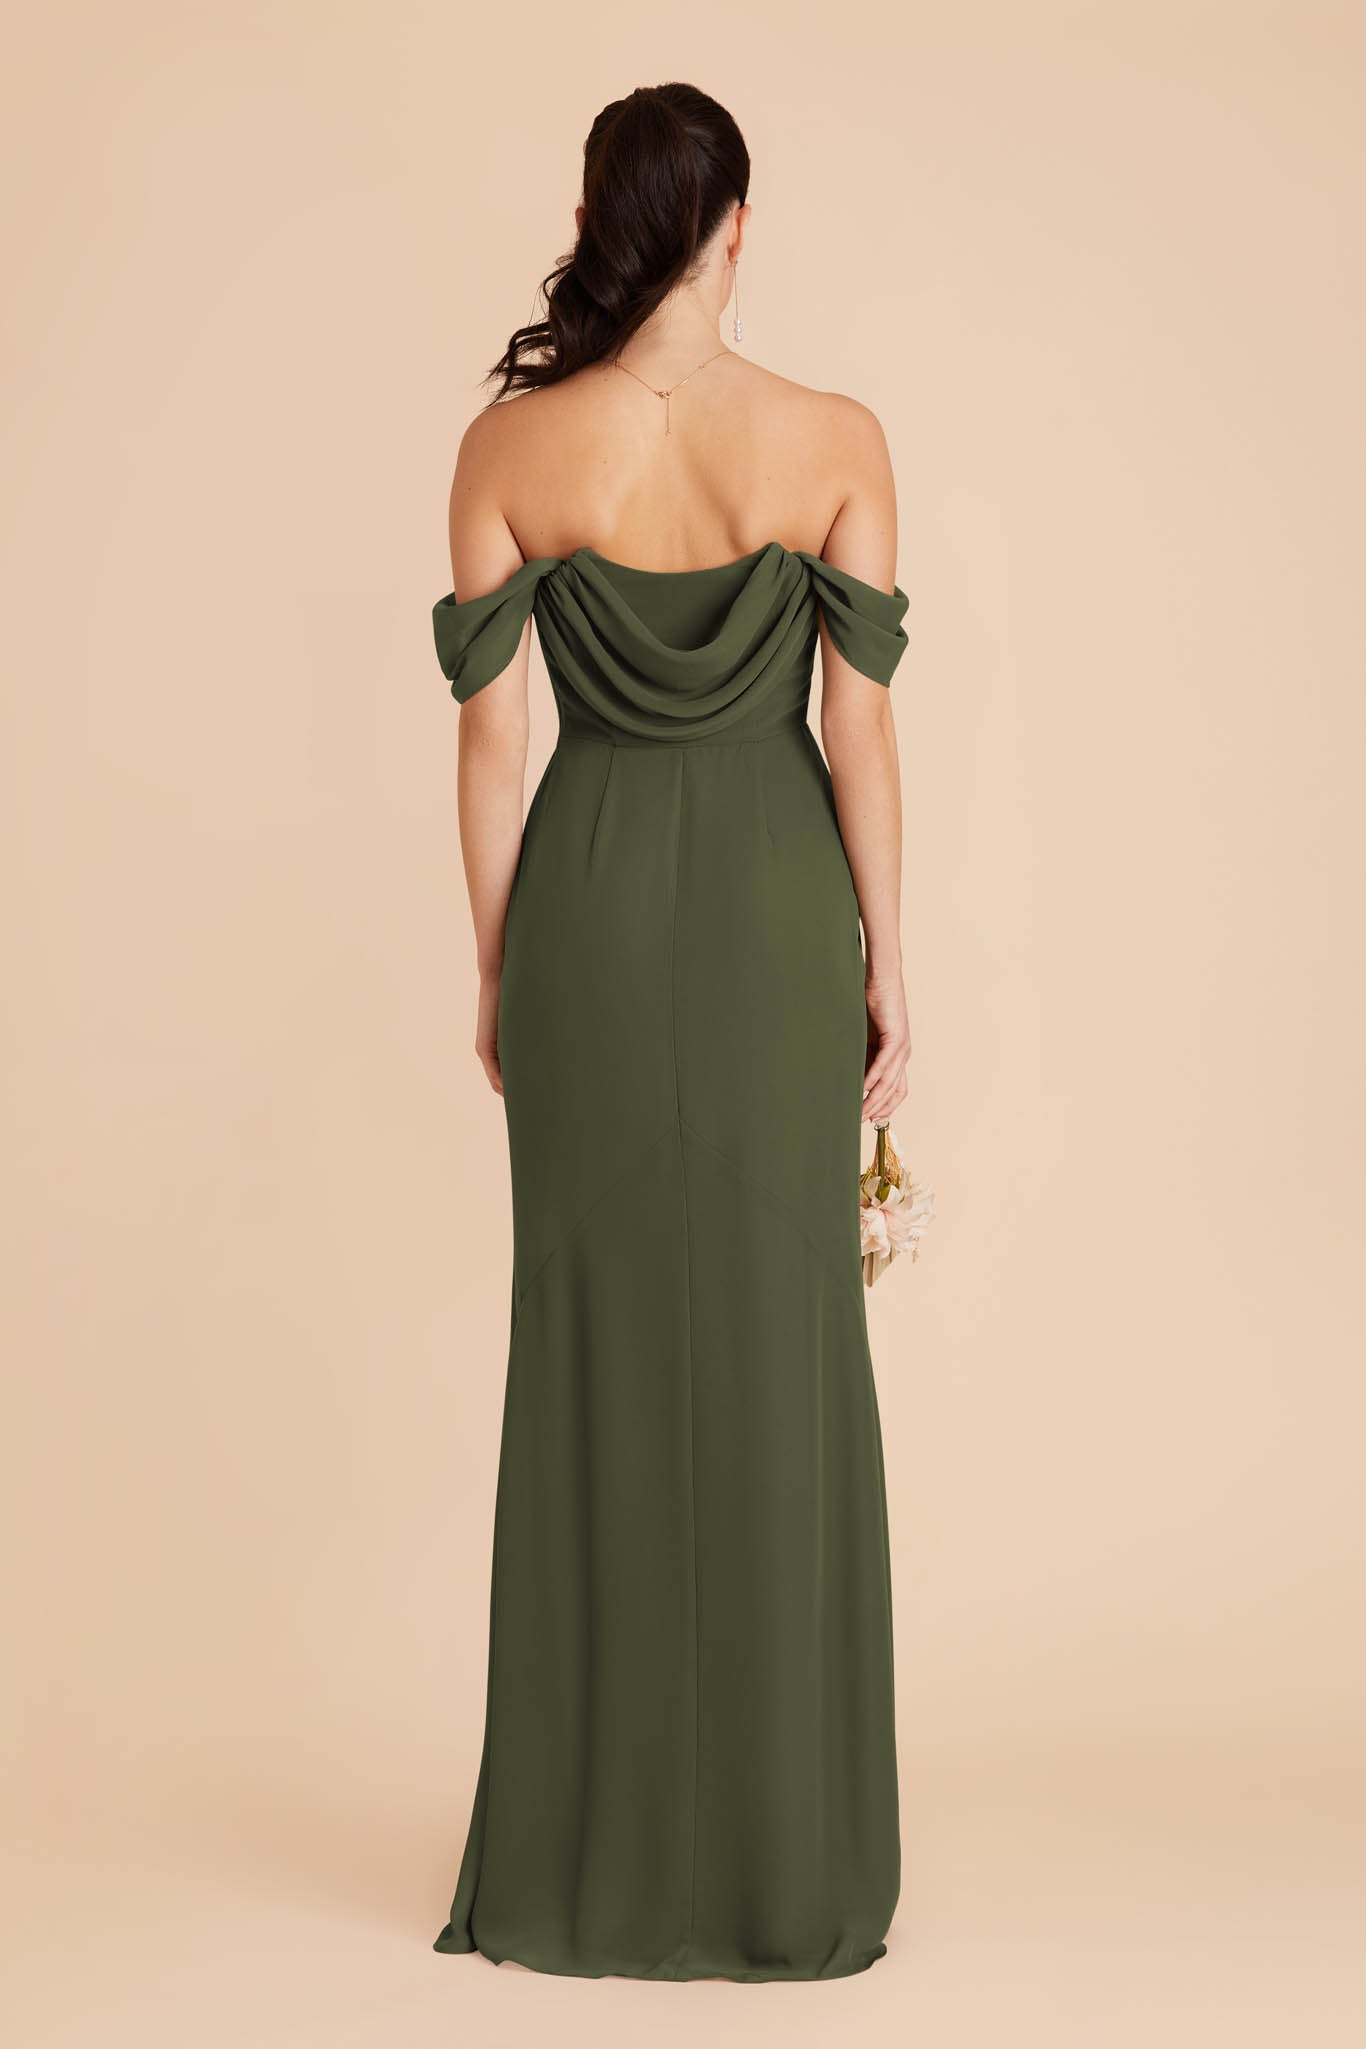 Olive Mira Convertible Dress by Birdy Grey